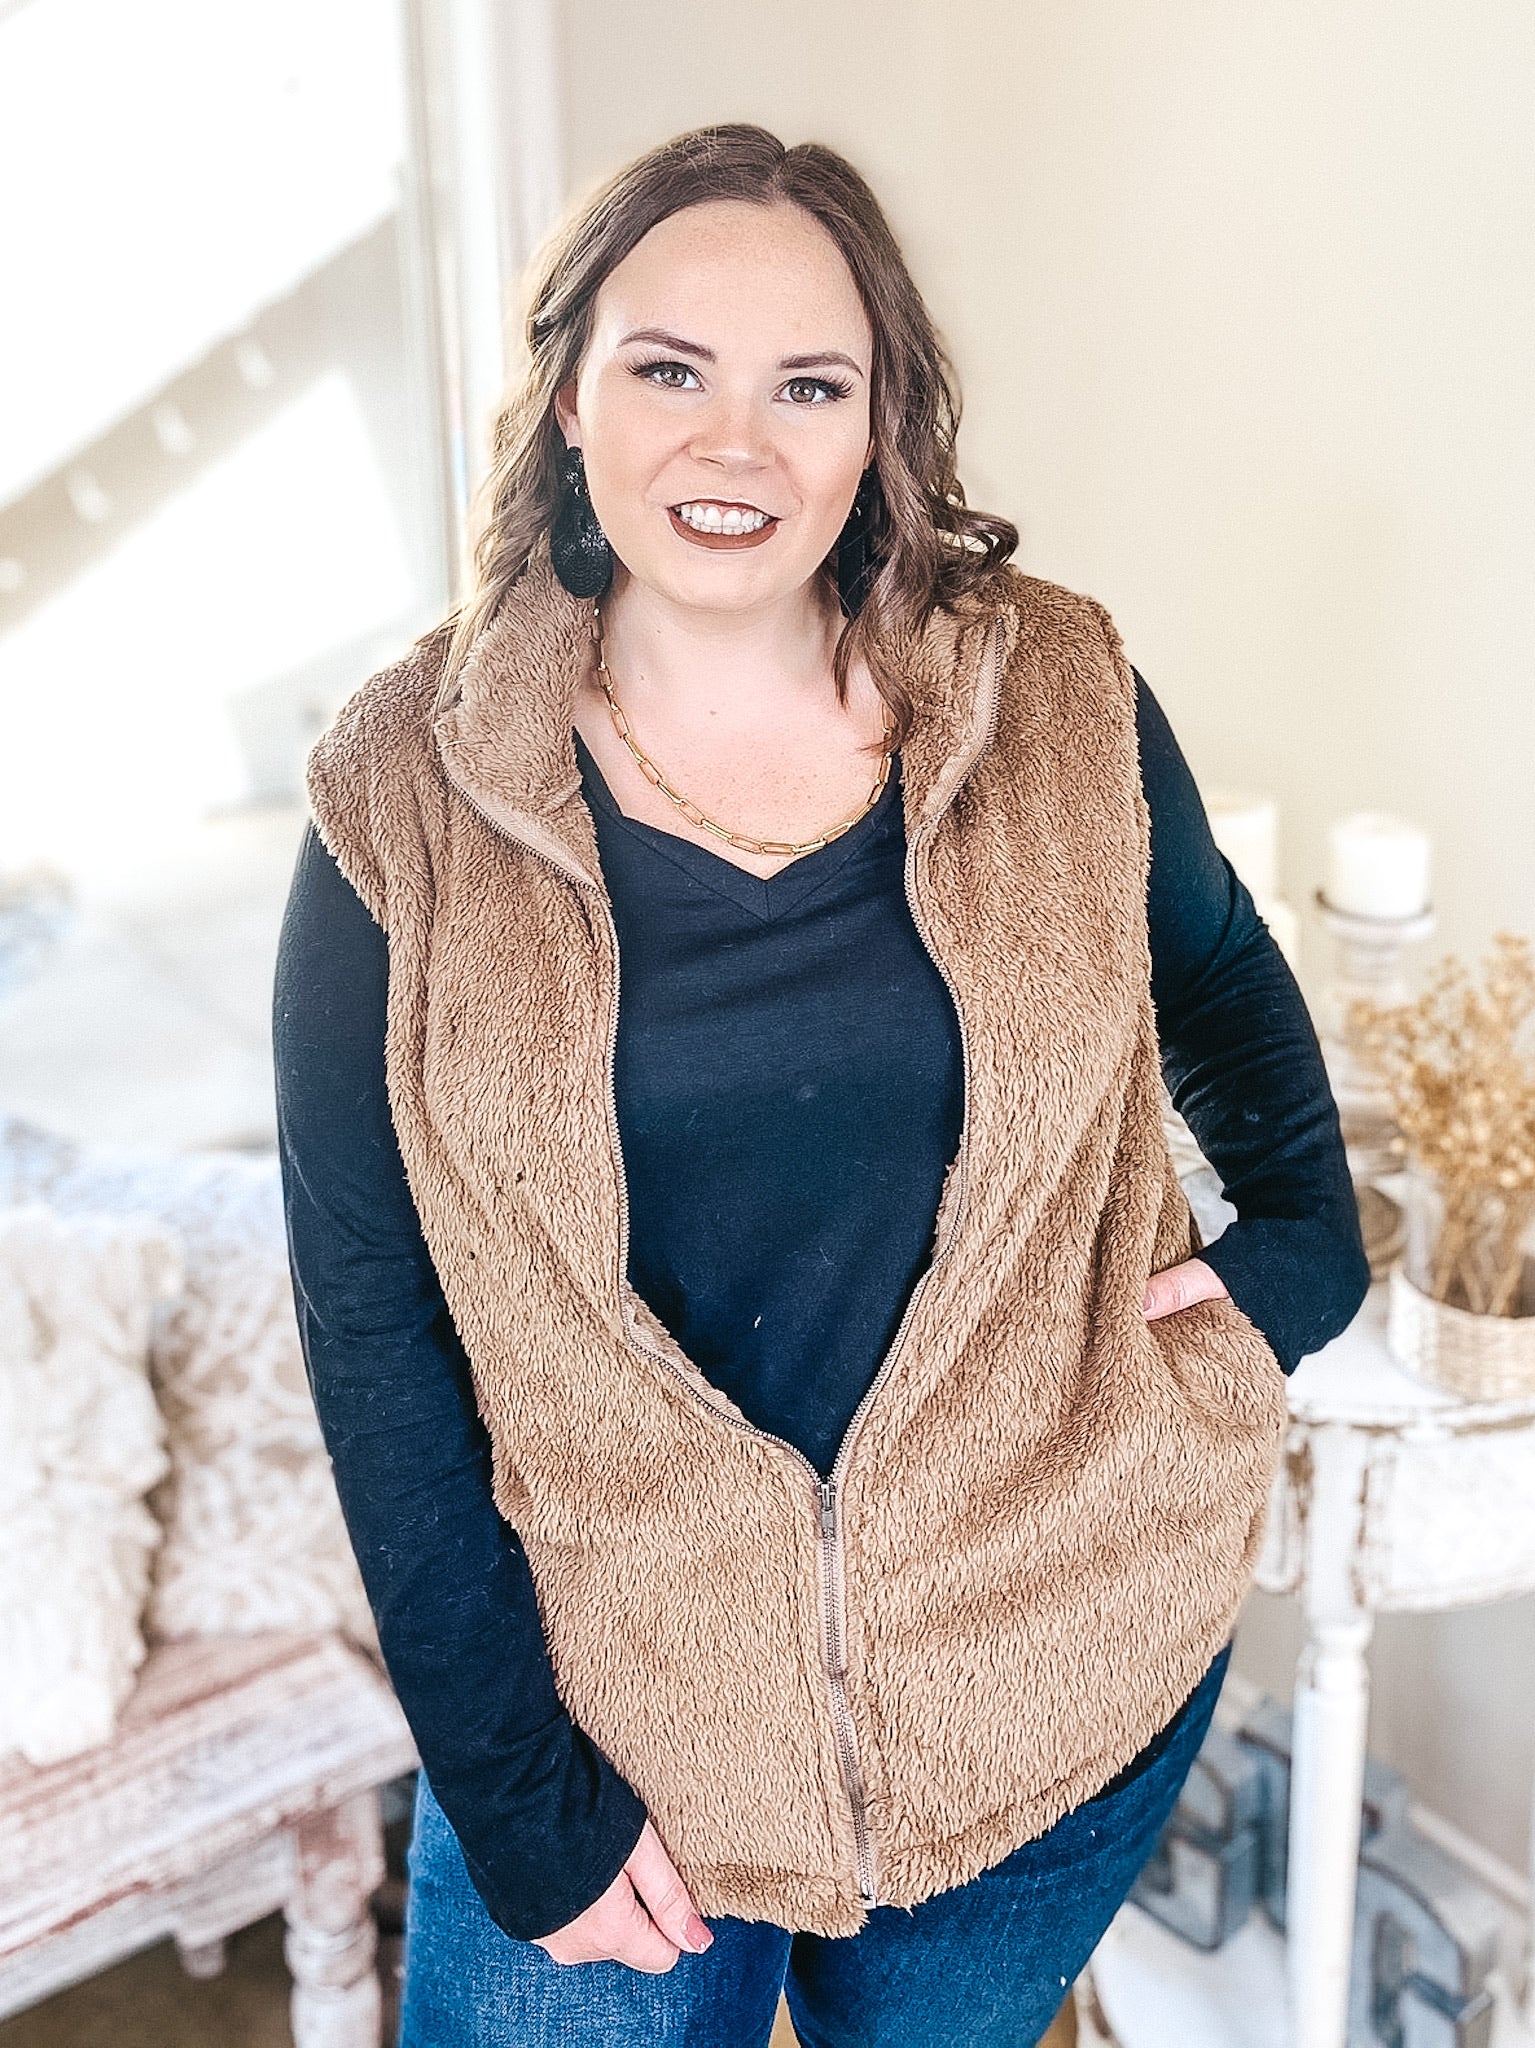 Up North Zip Up Wubby Vest with Pockets in Mocha Brown - Giddy Up Glamour Boutique